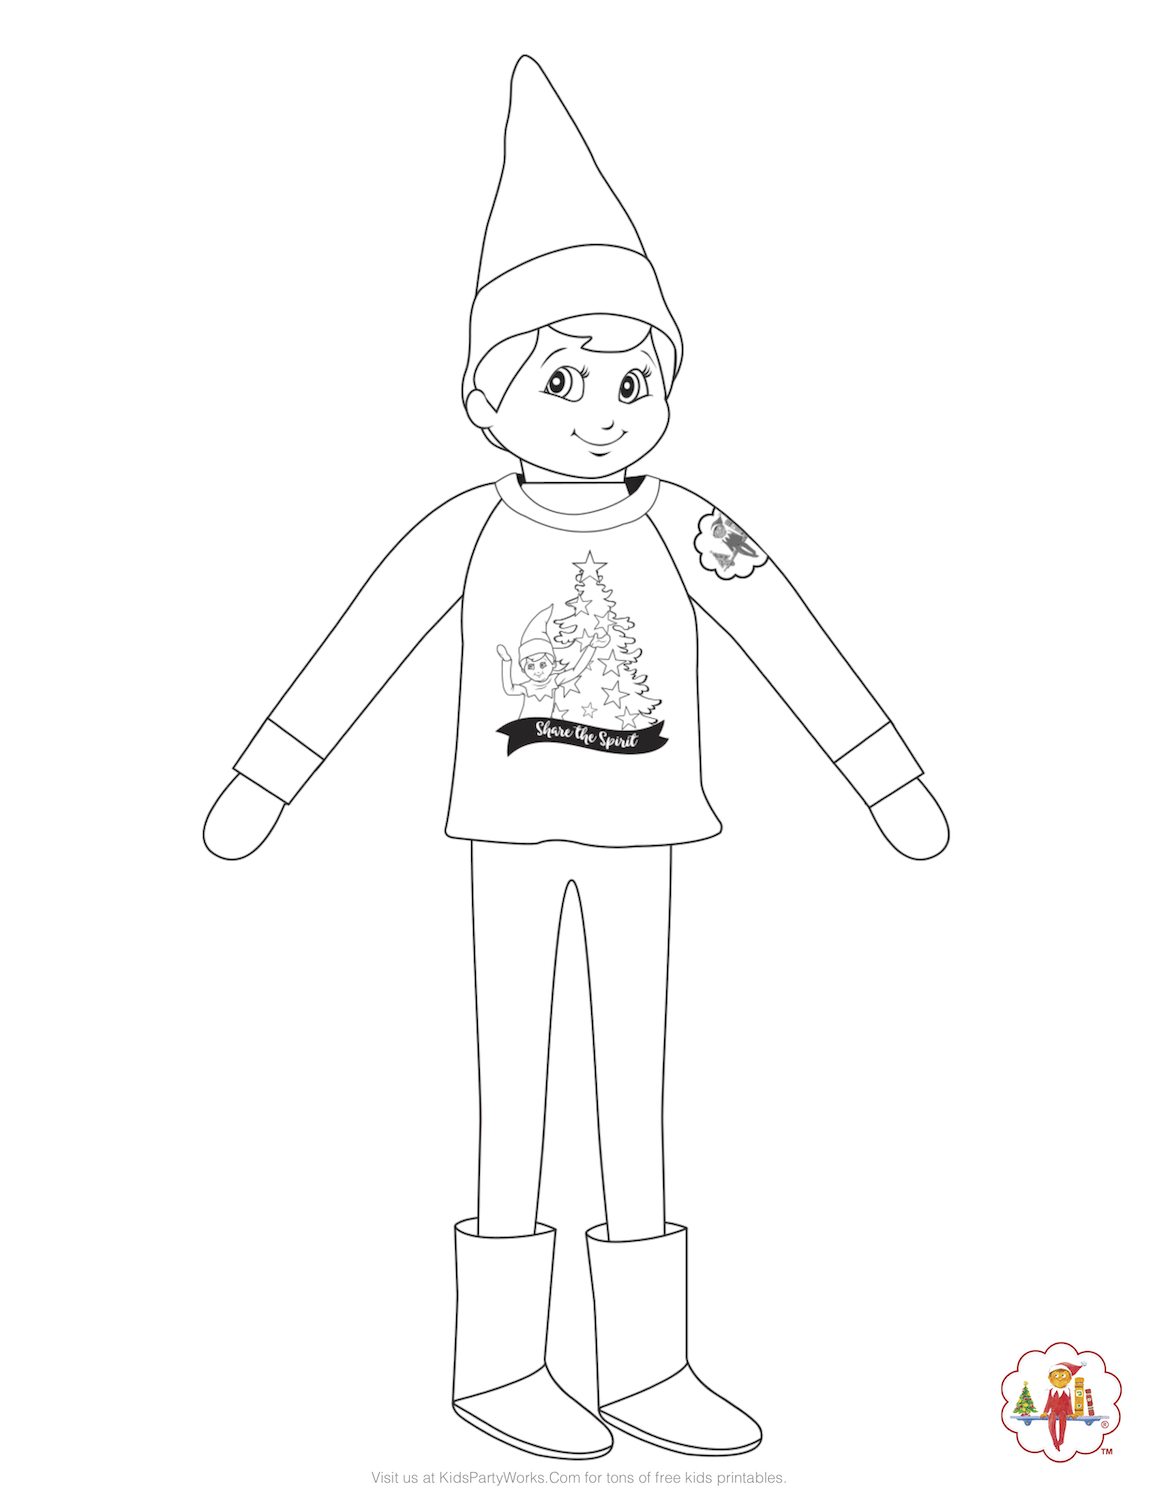 Elf on the Shelf Coloring Page